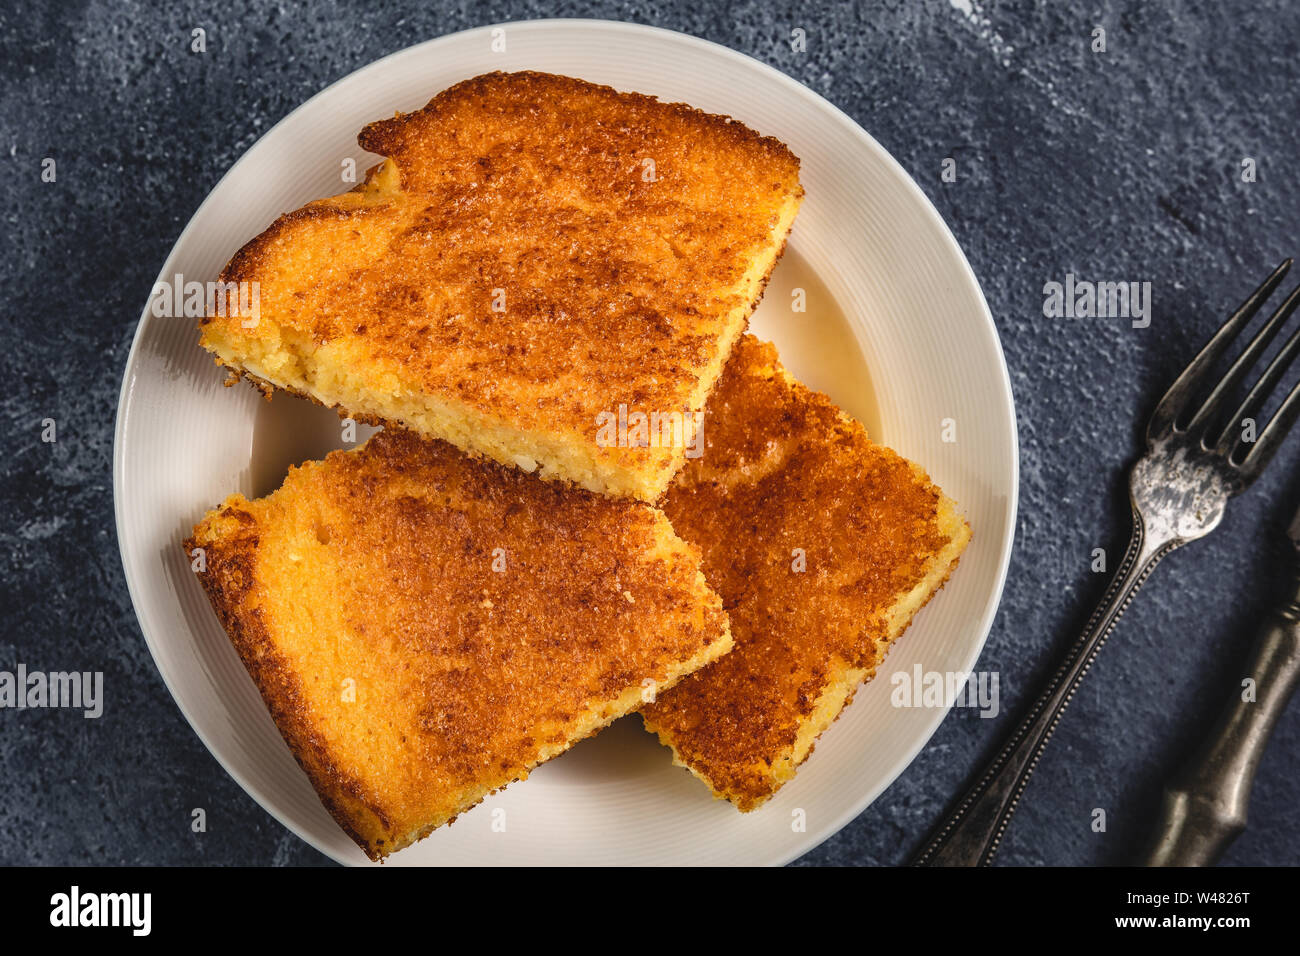 Corn Bread Squares Slices in White Plate on Dark Blue Rustic Background Stock Photo